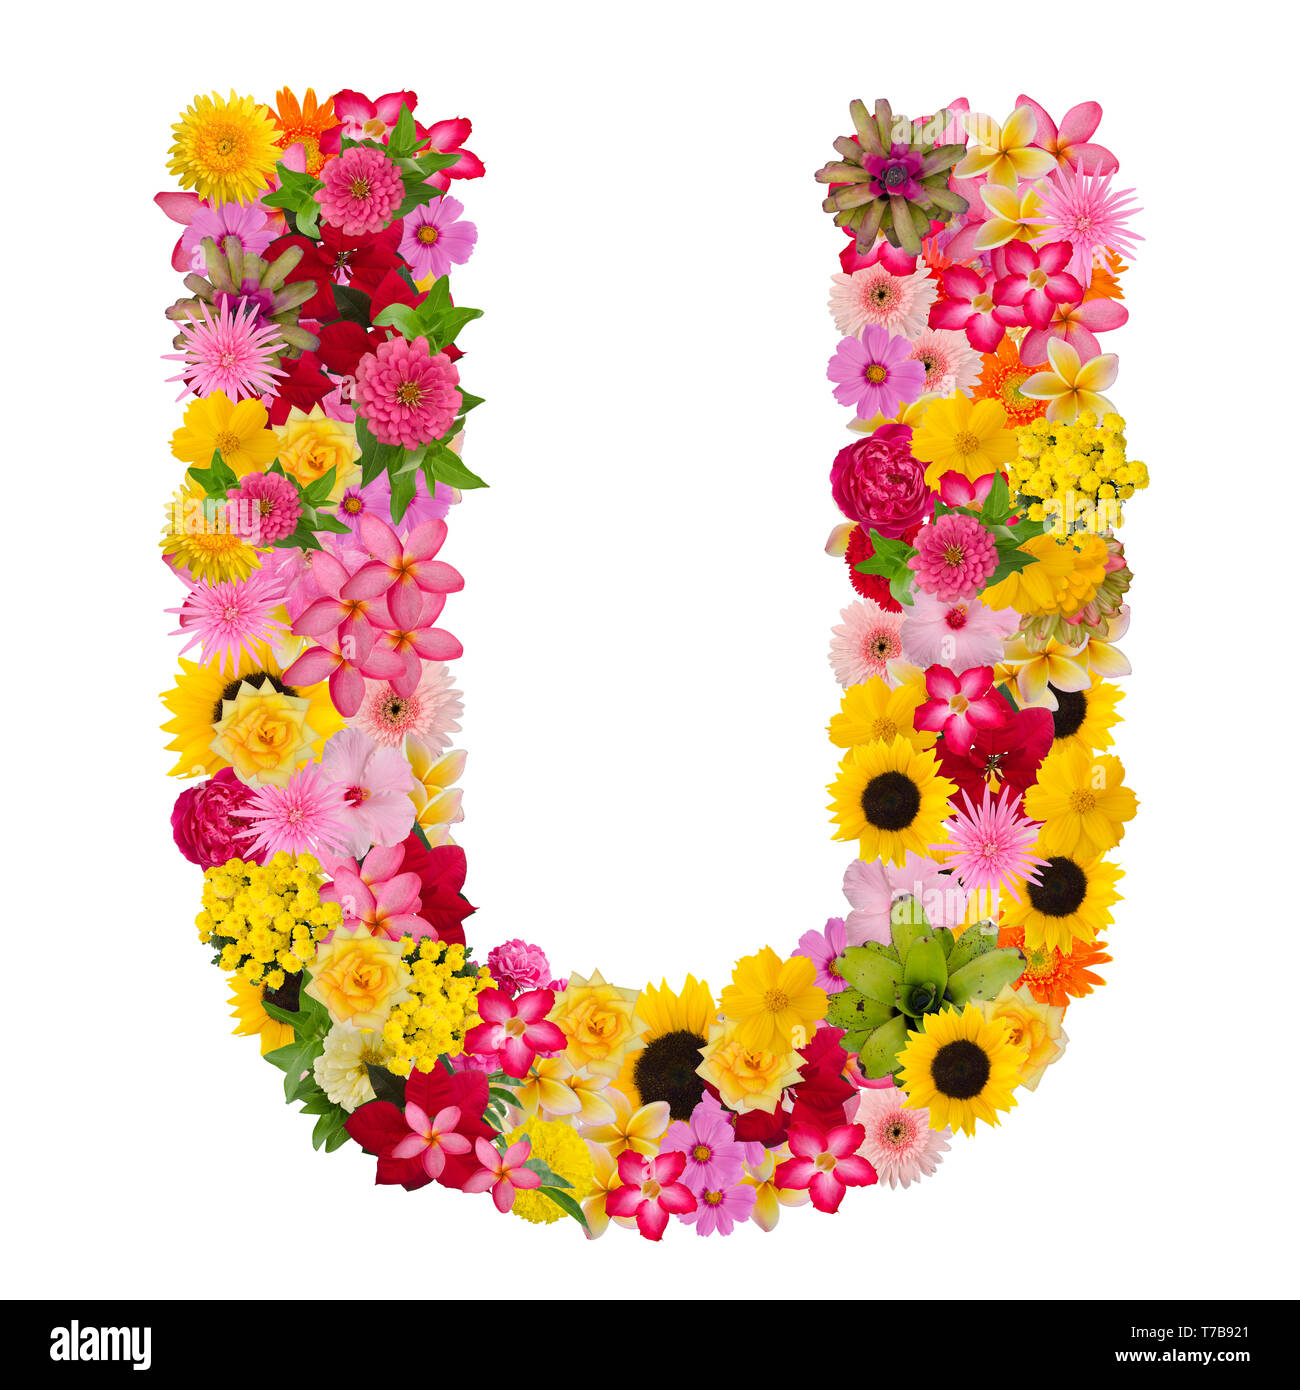 https://c8.alamy.com/comp/T7B921/letter-u-alphabet-with-flower-abc-concept-type-as-logo-isolated-on-white-background-with-clipping-path-T7B921.jpg